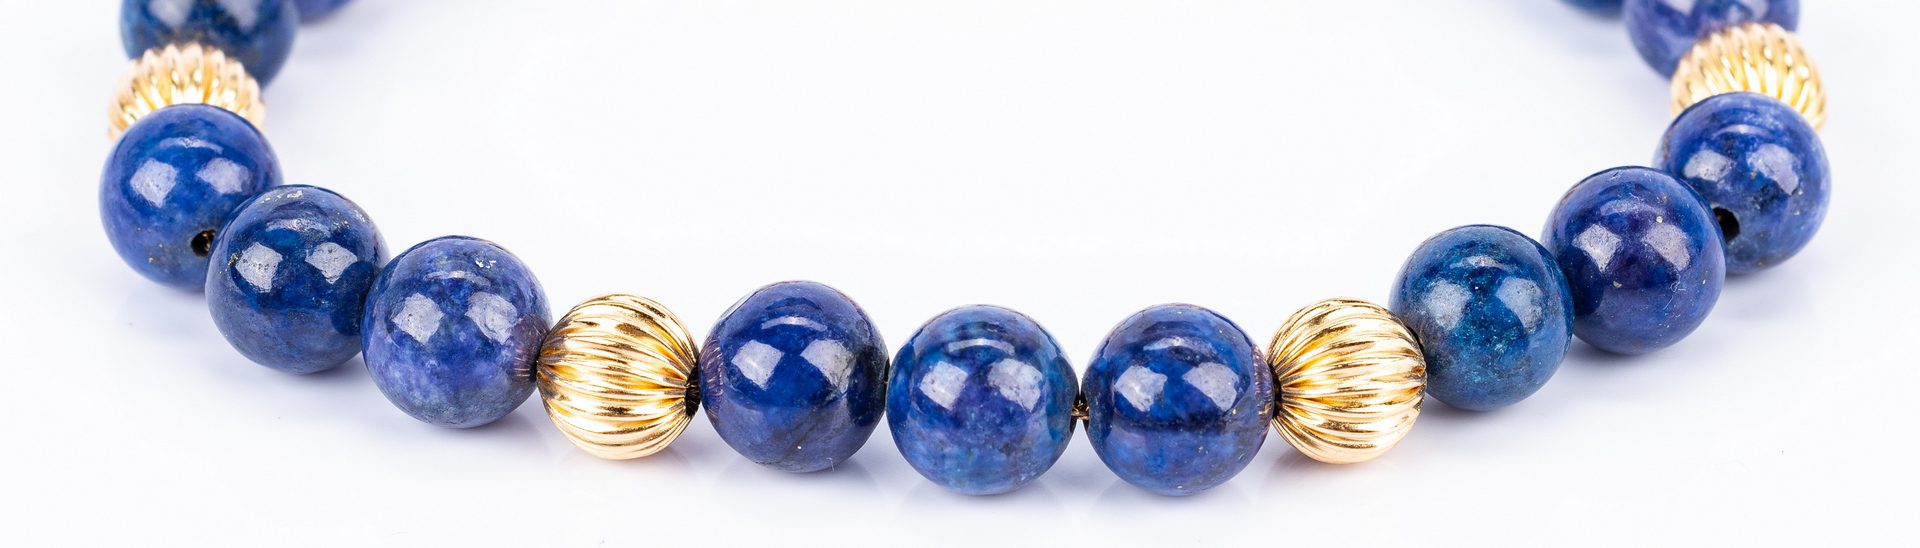 Lot 832: Group of 8 14K Pearl and Lapis Jewelry Items